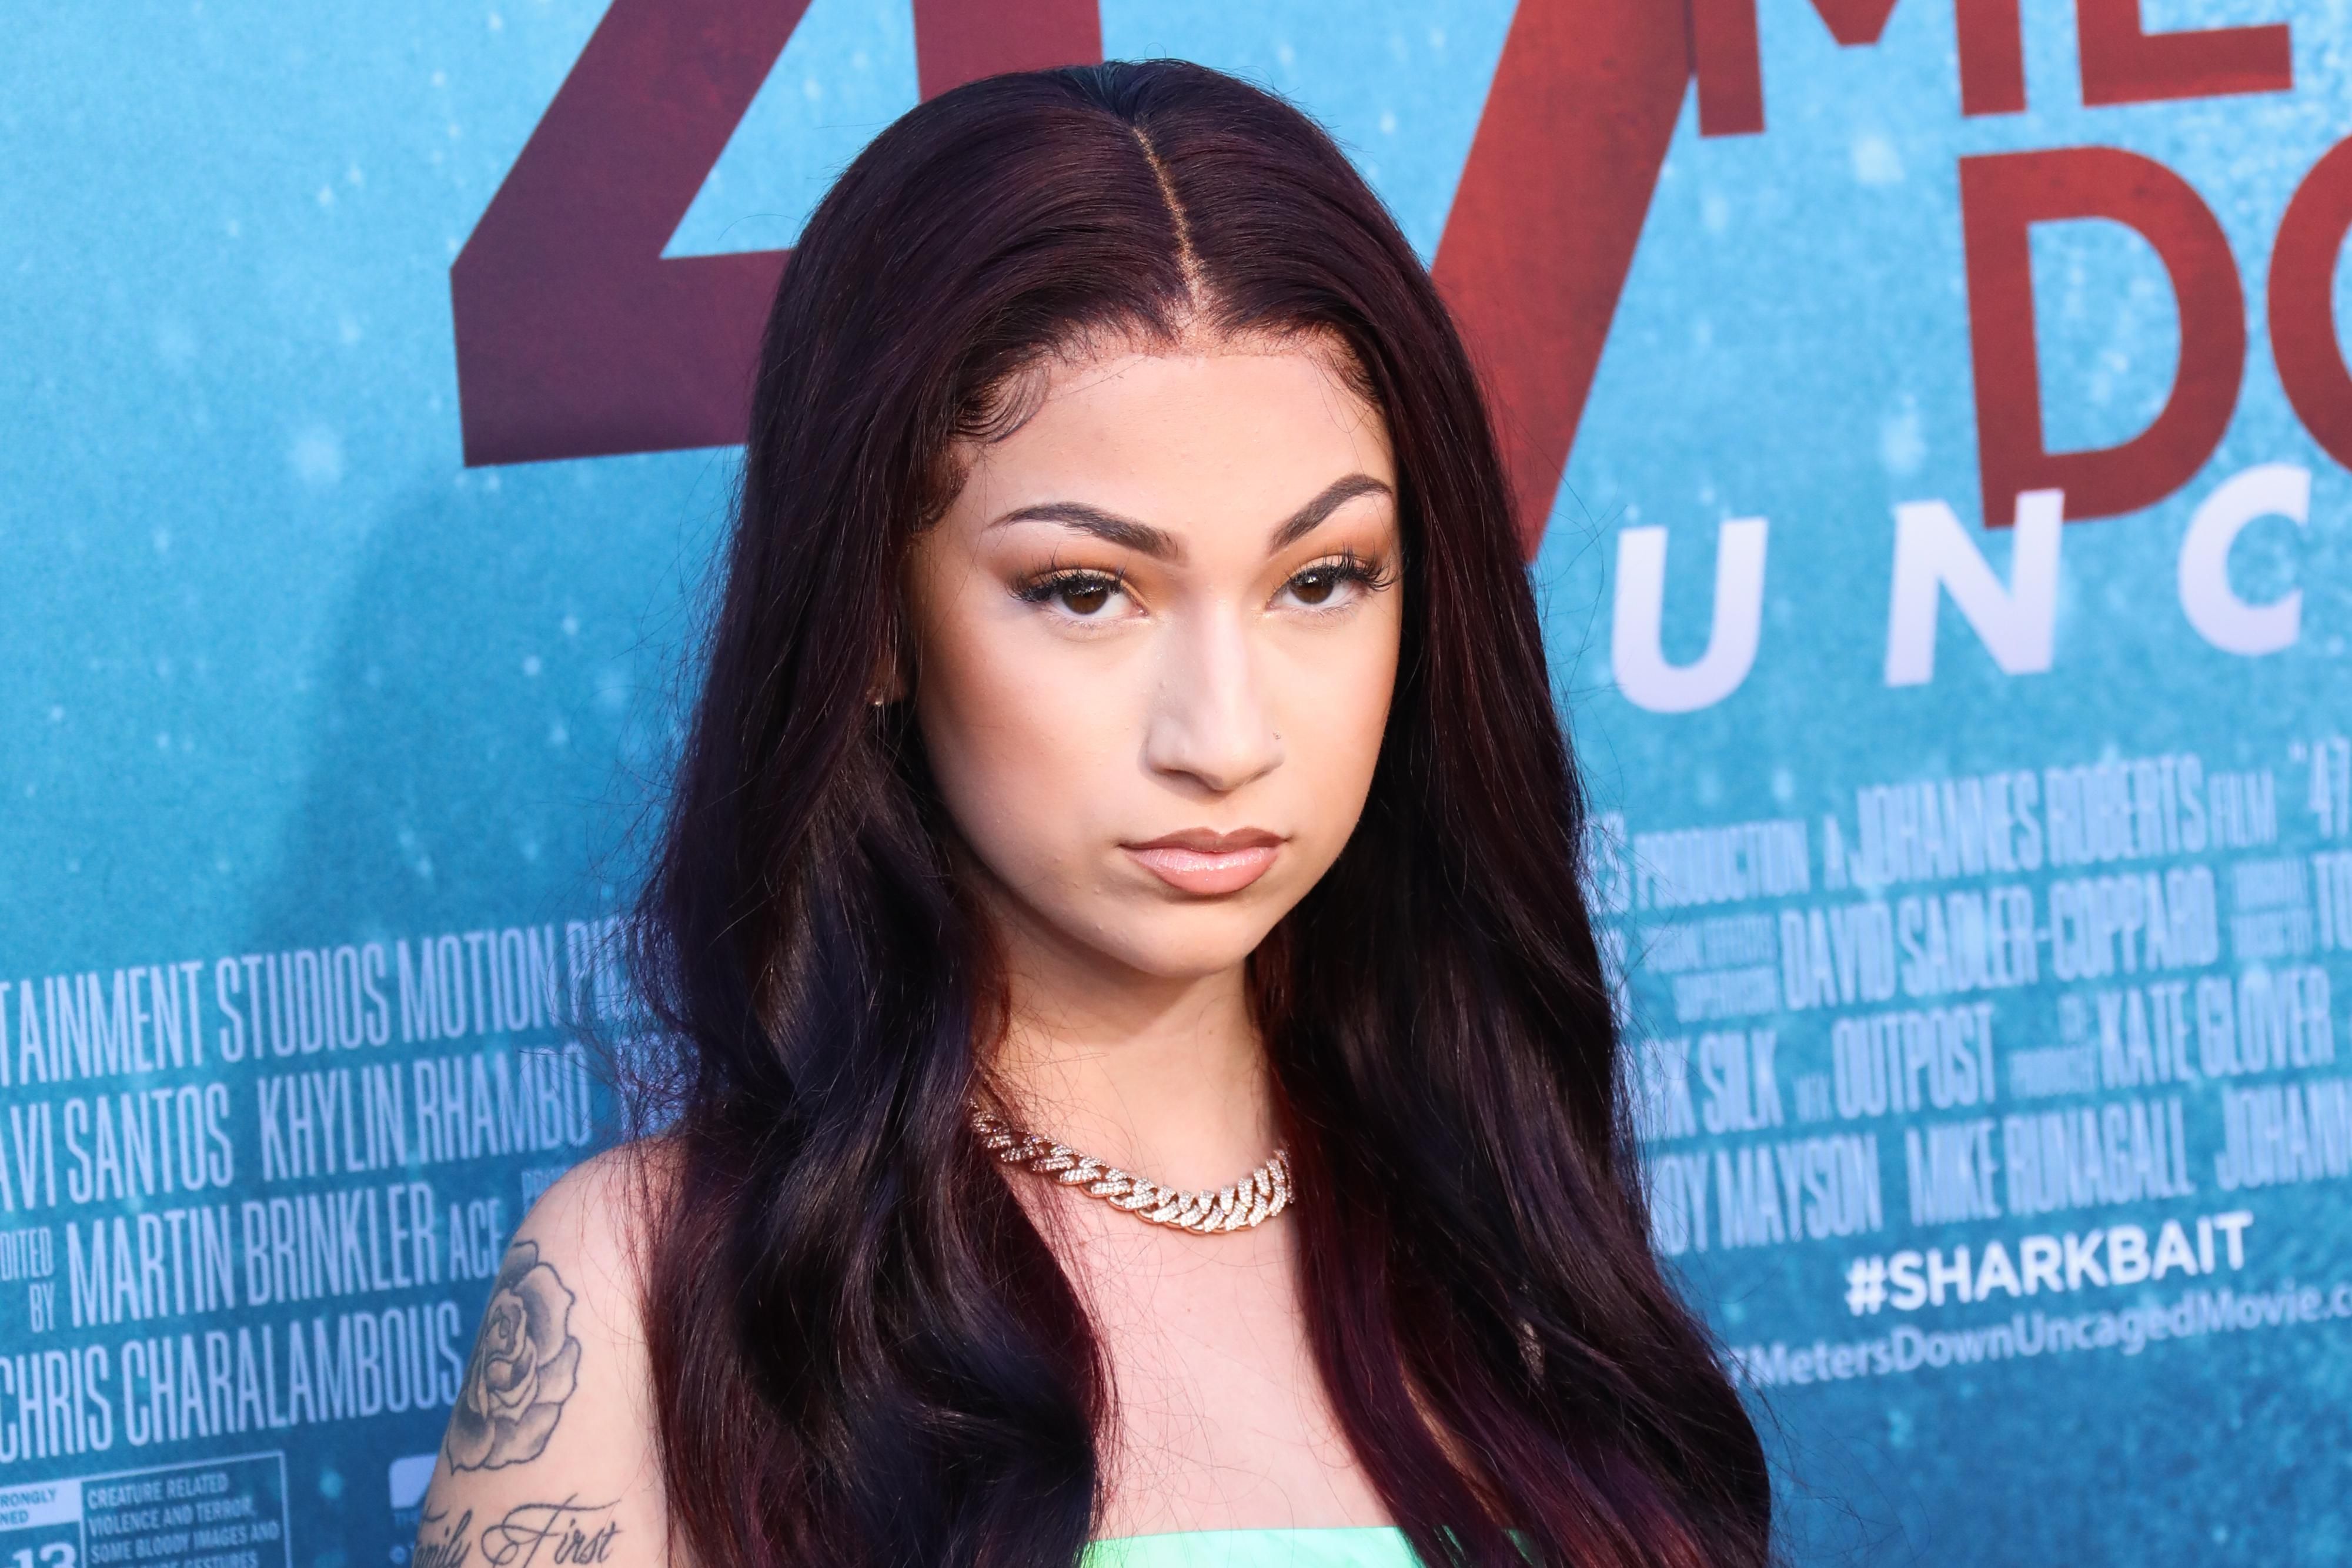 Bhad Bhabie Broke OnlyFans Record By Making $1 Million in 6 Hours - PAPER